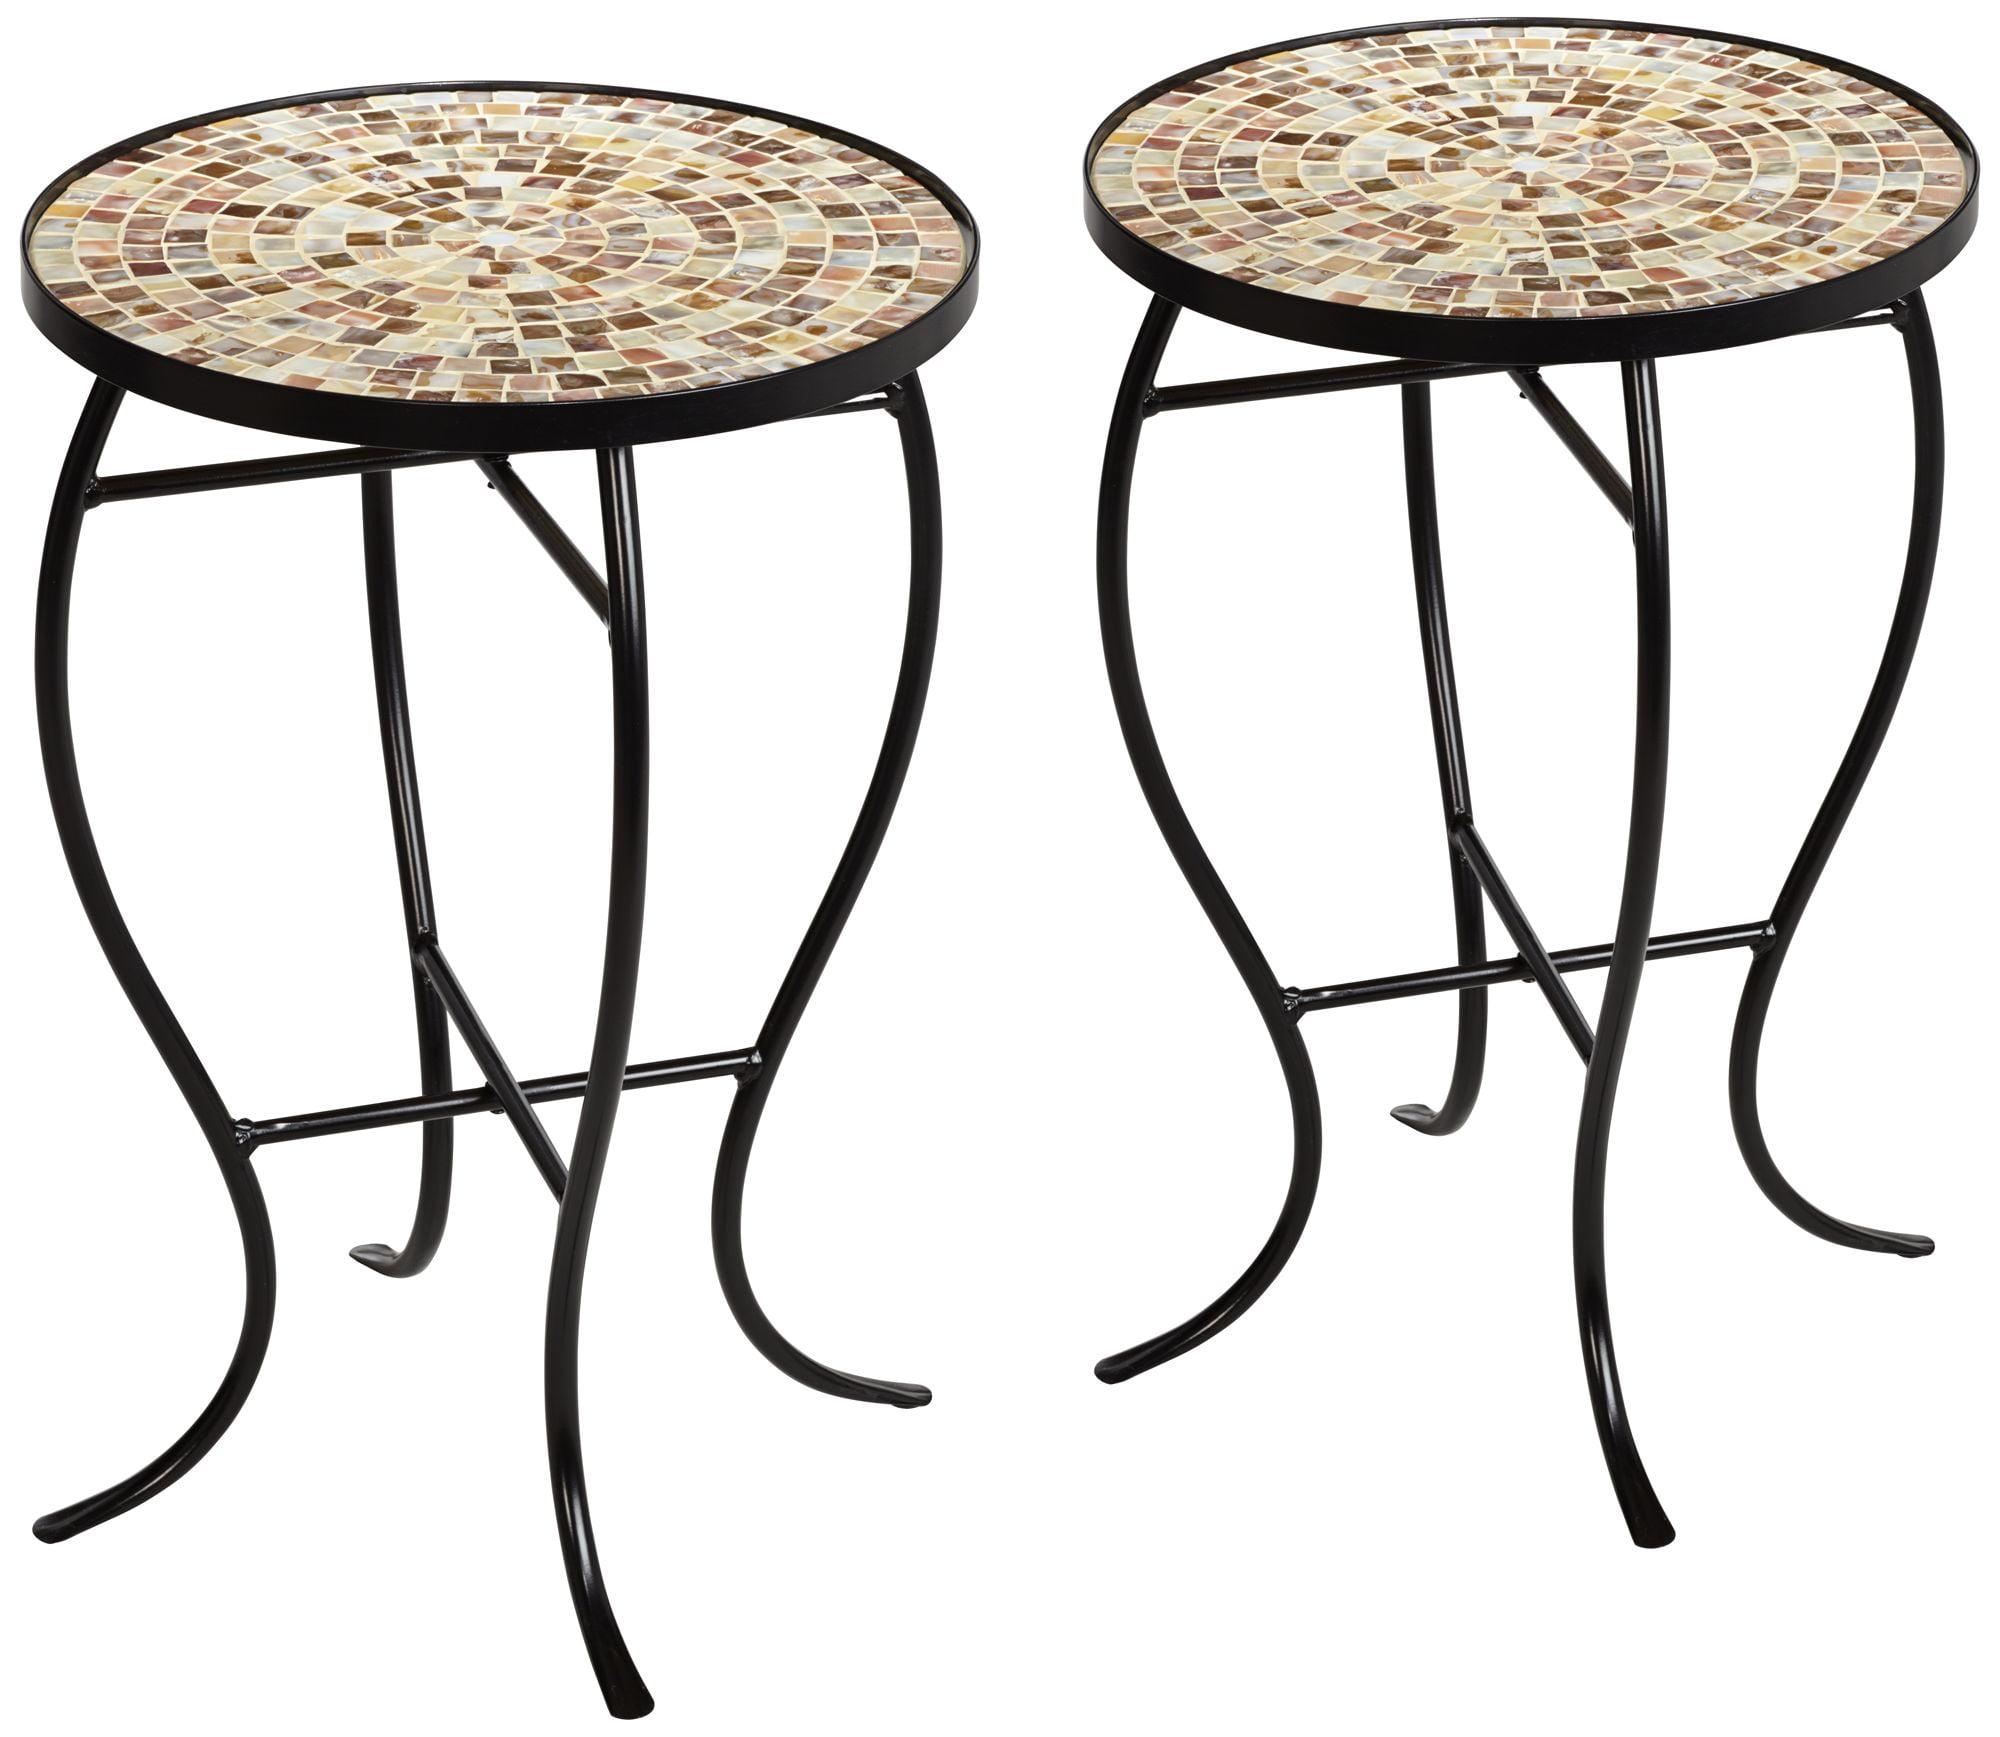 Mother of Pearl Mosaic Black Iron Outdoor Accent Tables Set of 2